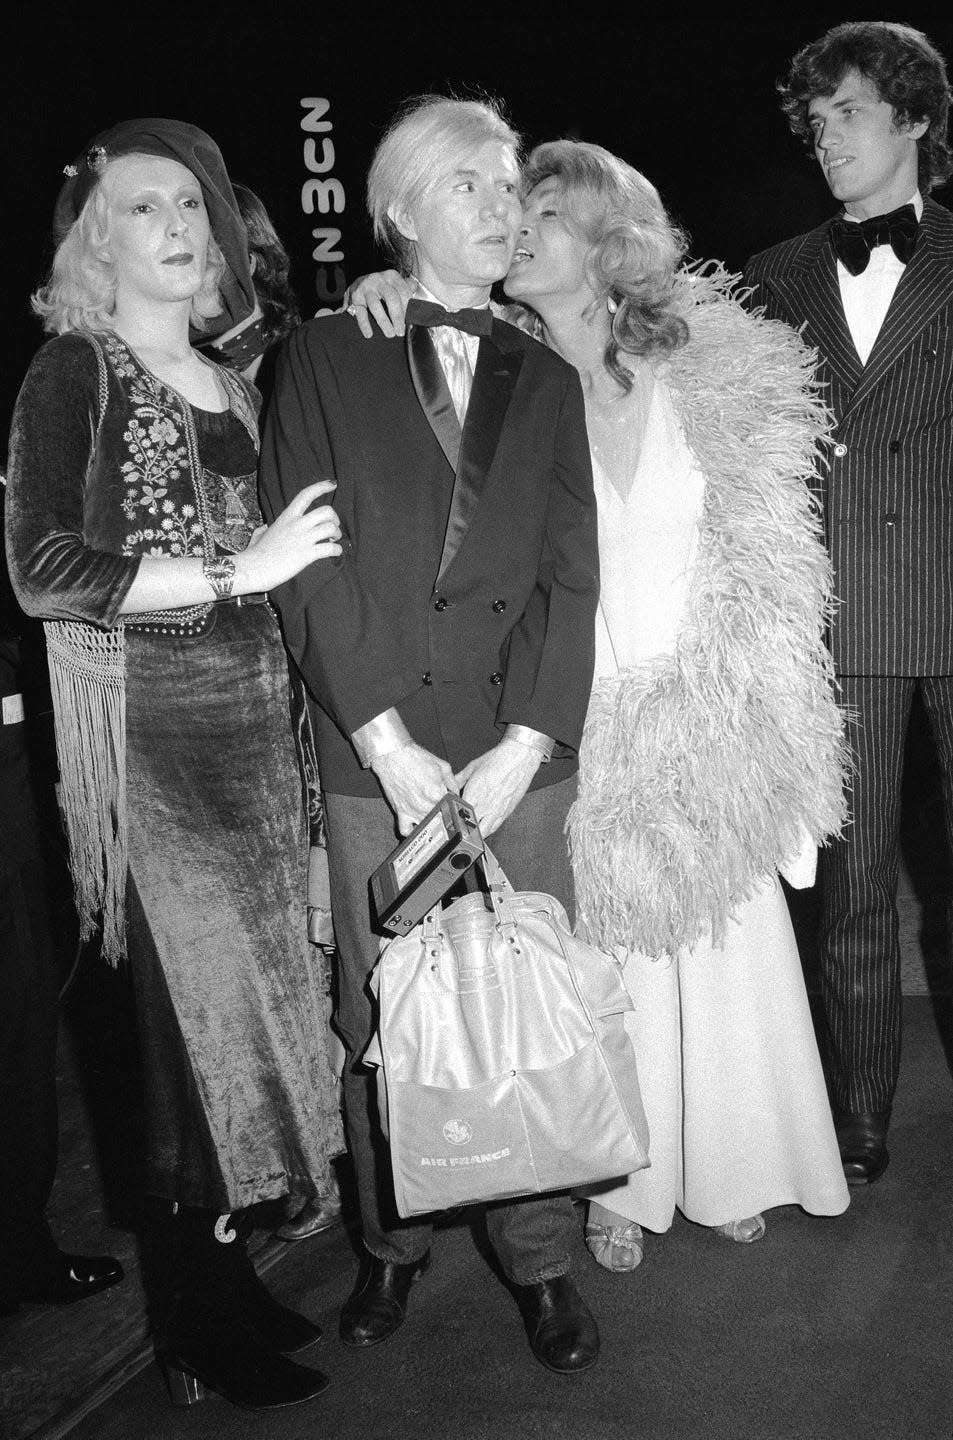 <p>Warhol seems confused by actress Sylvia Miles's intimate interaction with him, as he arrives to the Fiddler on the Roof premiere at the Rivoli Theater, along with Candy Darling.</p>